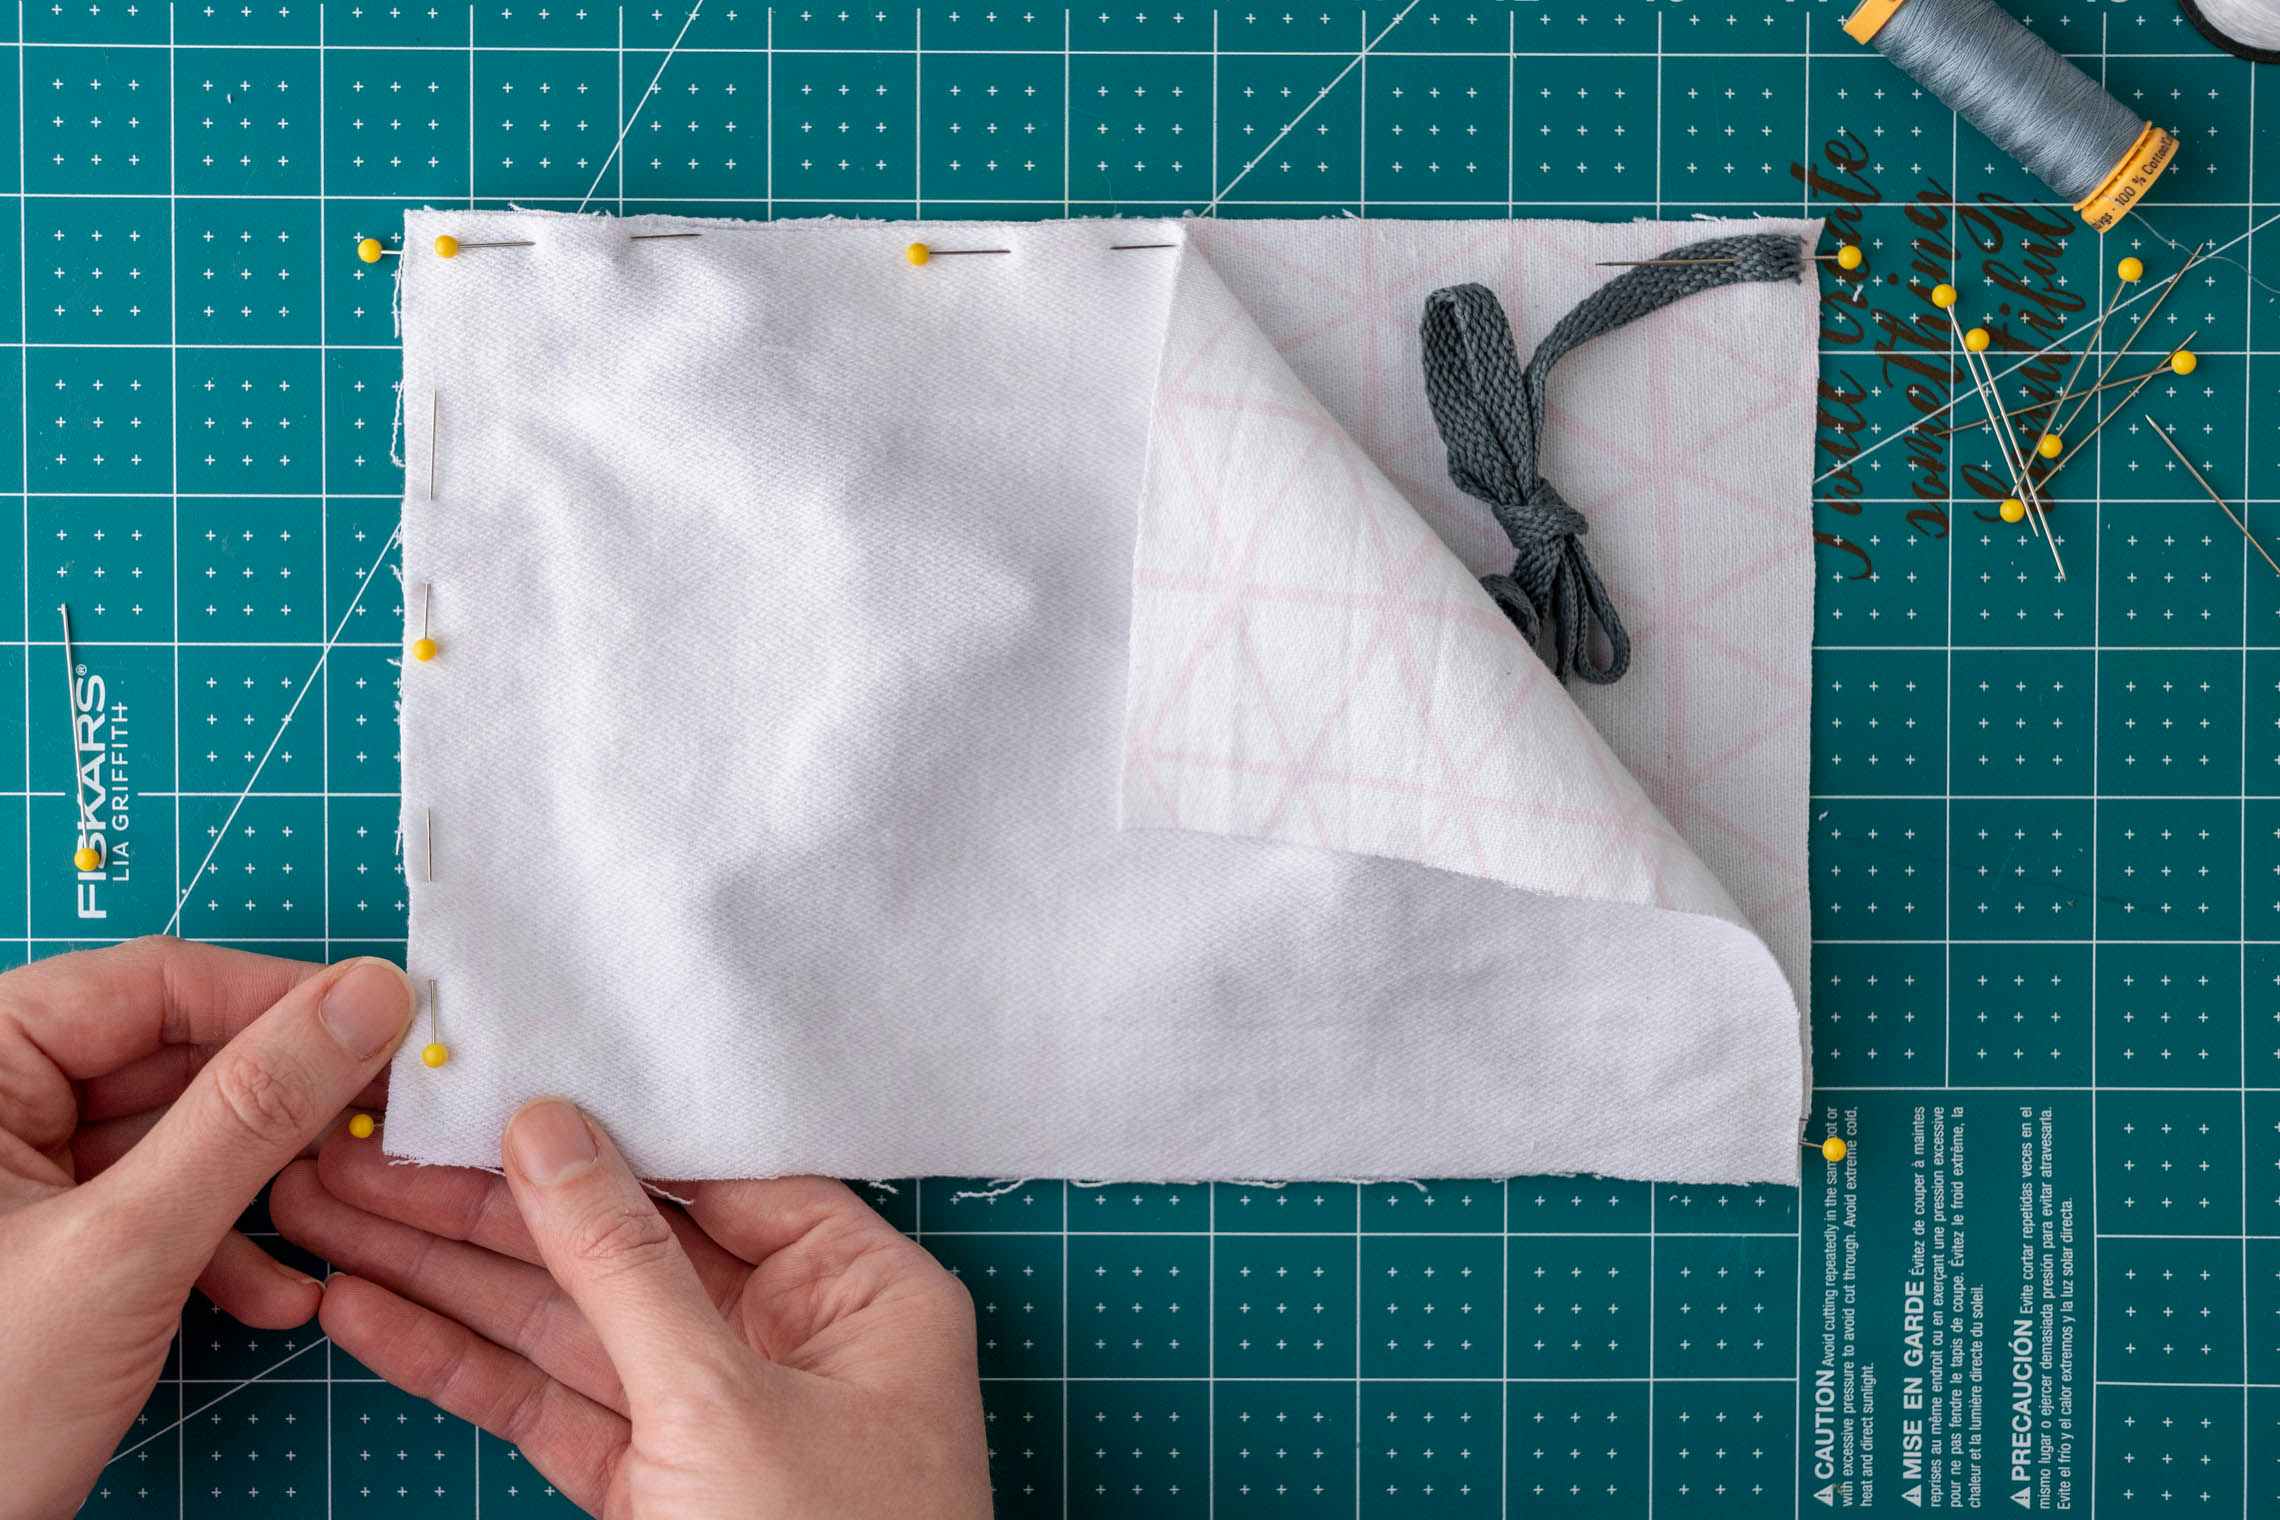 Placing the second piece of fabric on top of the first, covering the shoelaces, which are gathered in the middle.